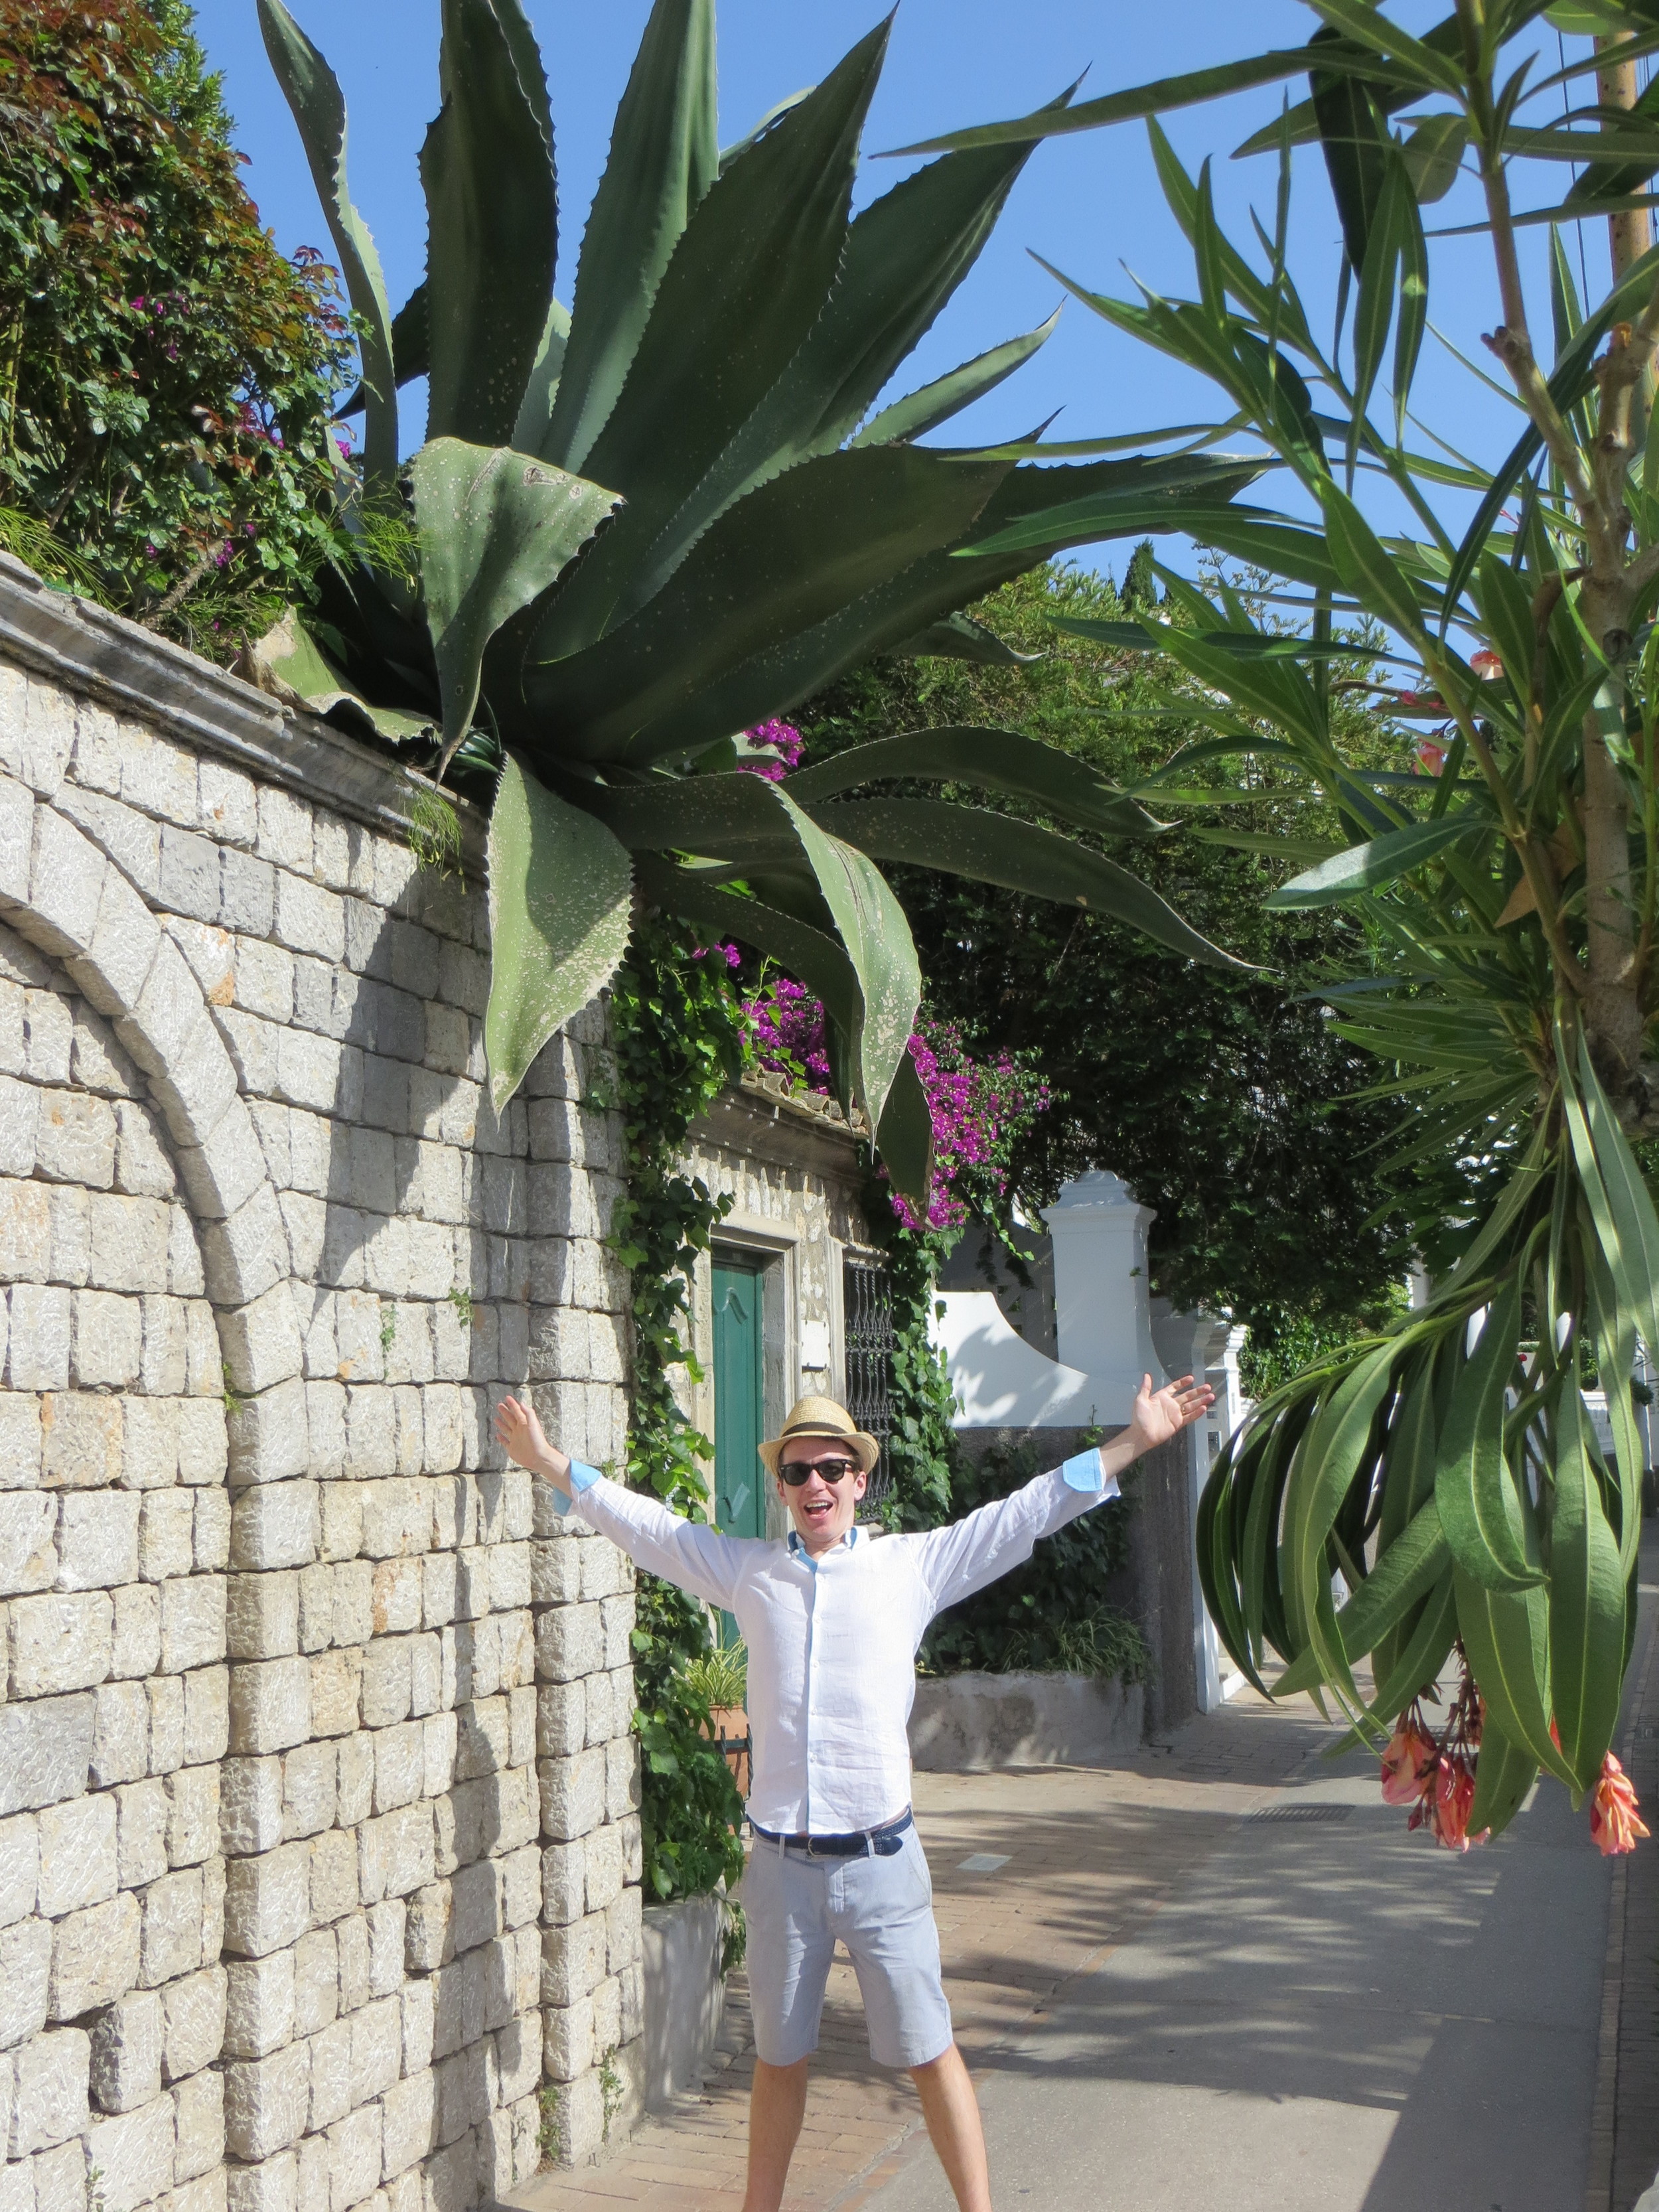 This Agave seemed to be defying the laws of gravity. 